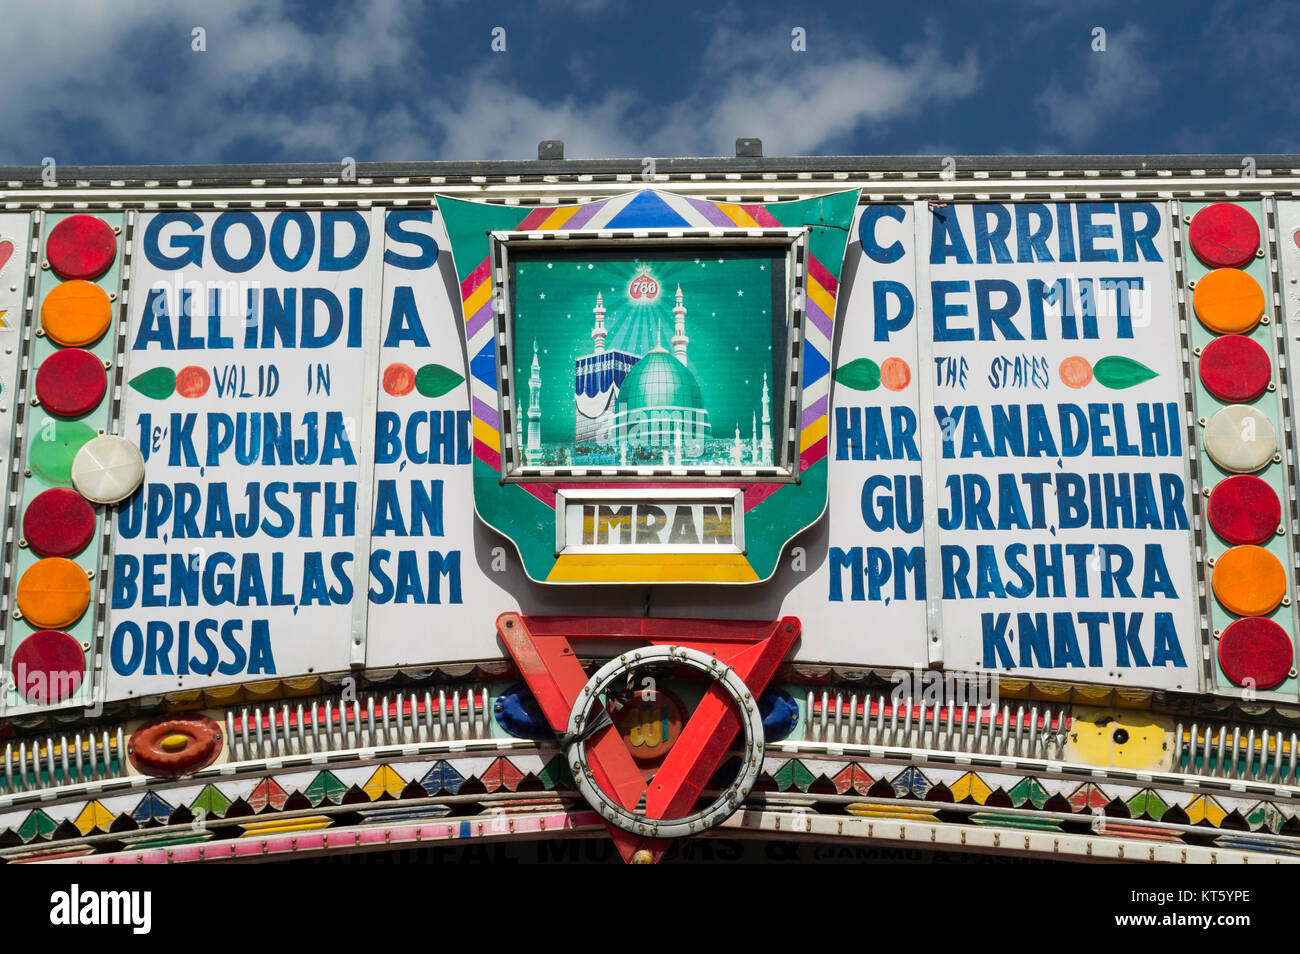 Jammu and Kashmir, India. Sign on goods carrier Stock Photo